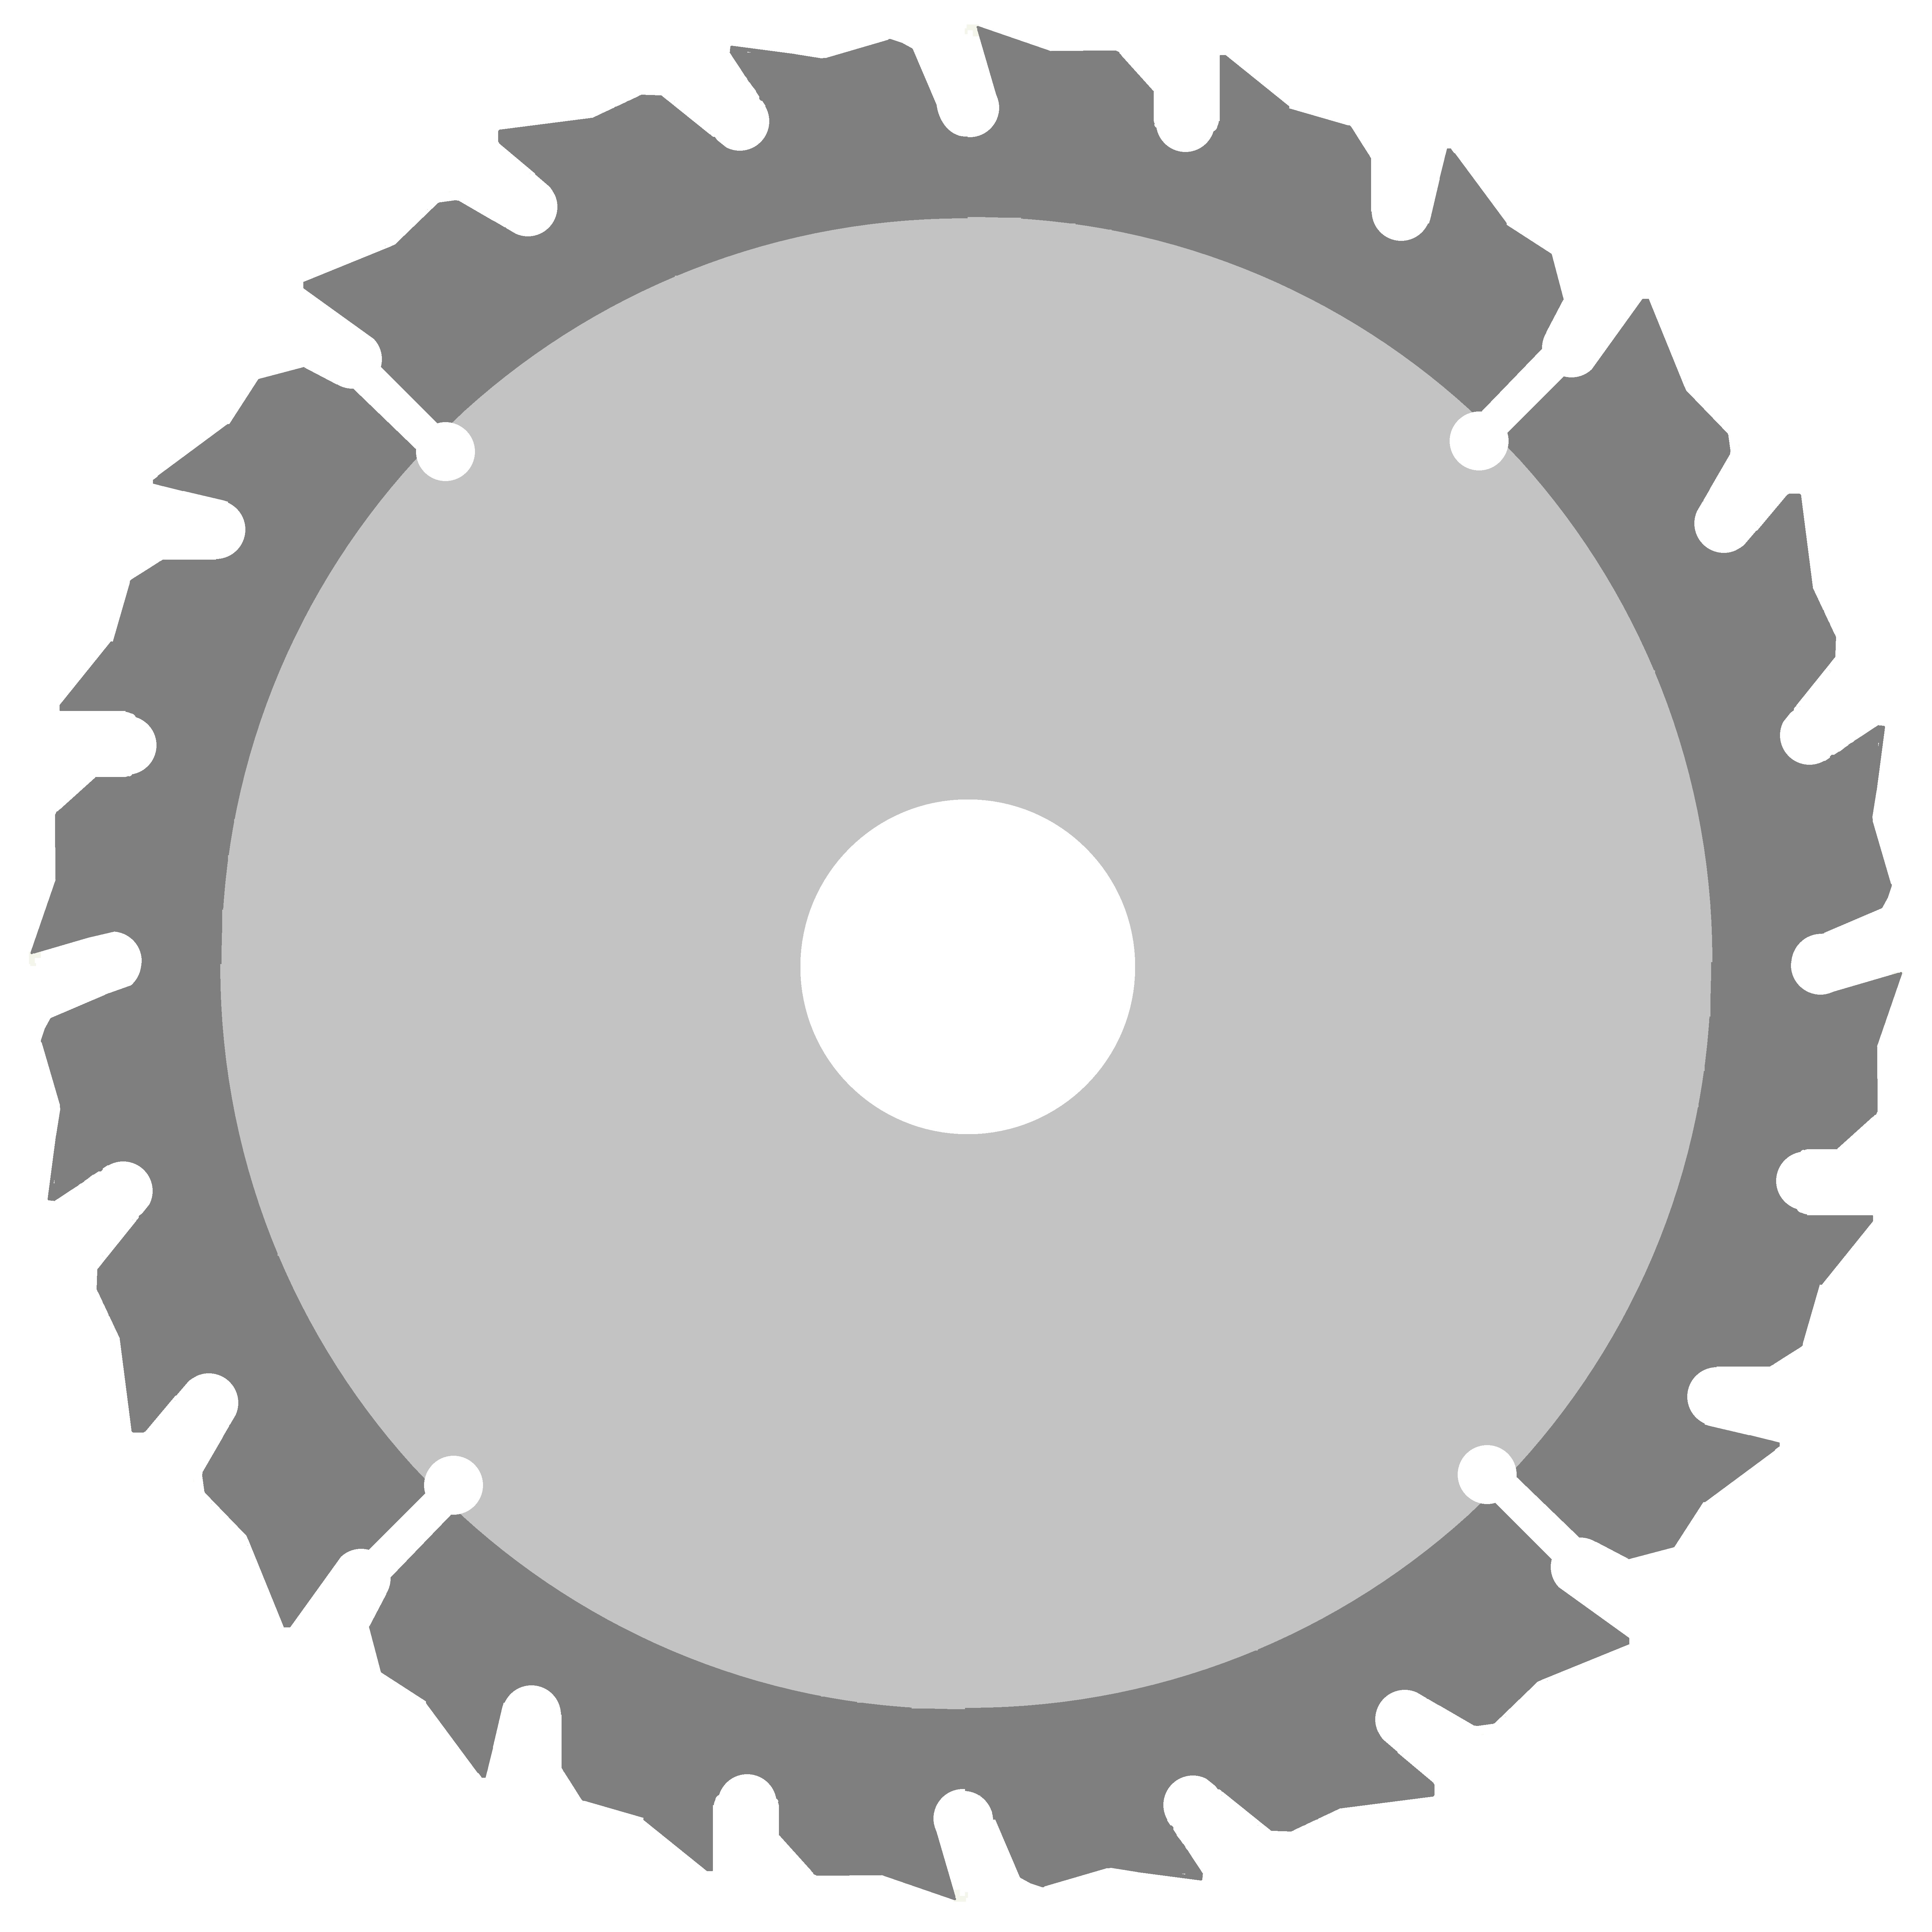 power saw clipart - photo #30